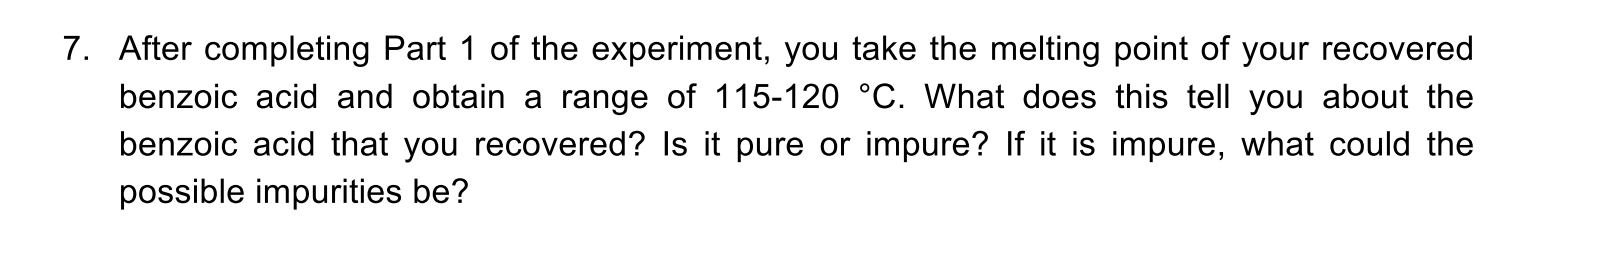 7. After completing Part 1 of the experiment, you take the melting point of your recovered
benzoic acid and obtain a range of 115-120 °C. What does this tell you about the
benzoic acid that you recovered? Is it pure or impure? If it is impure, what could the
possible impurities be?
